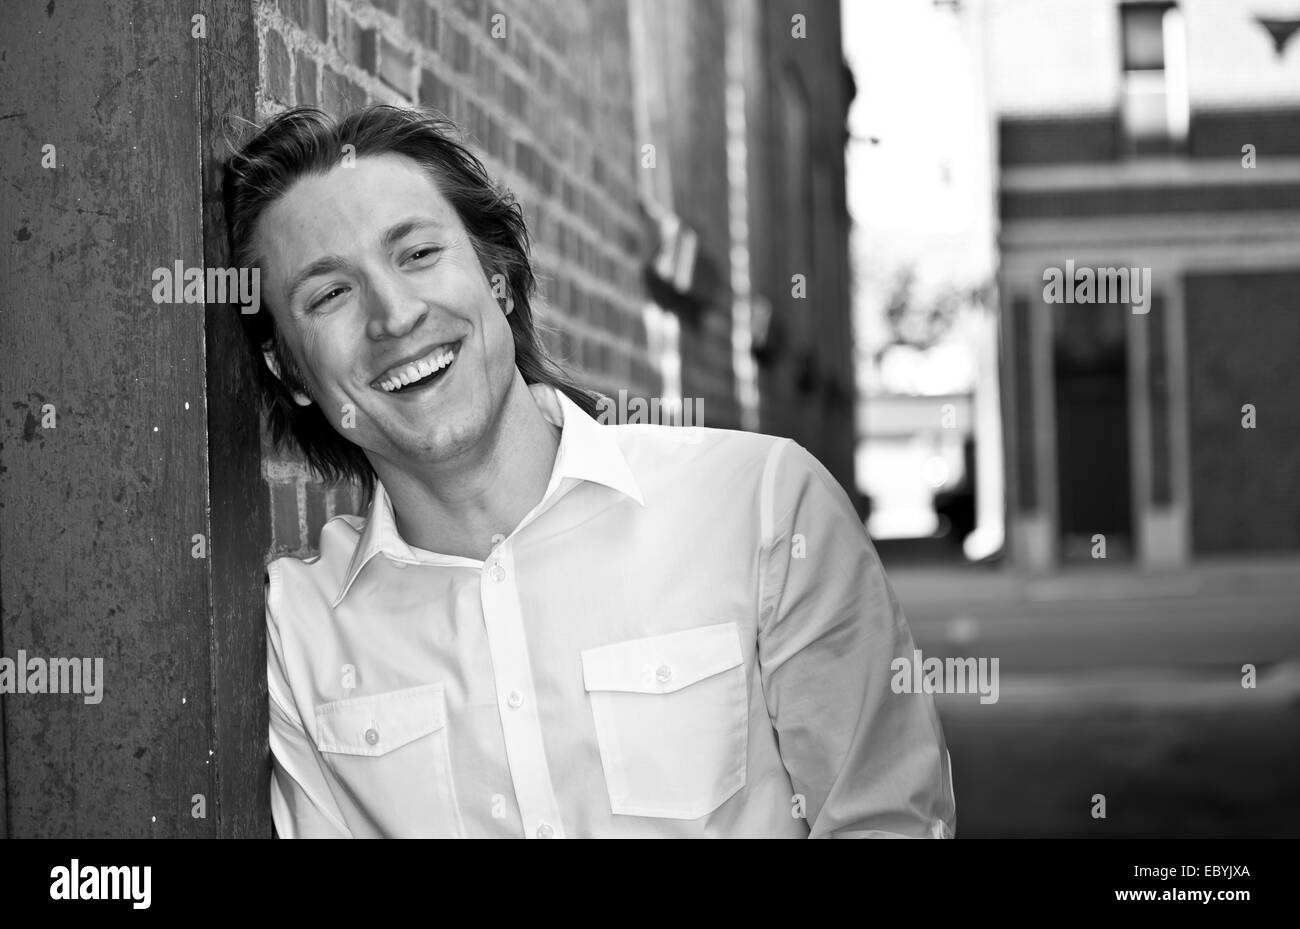 Black and white image of a smiling young guy in an urban environment. Stock Photo